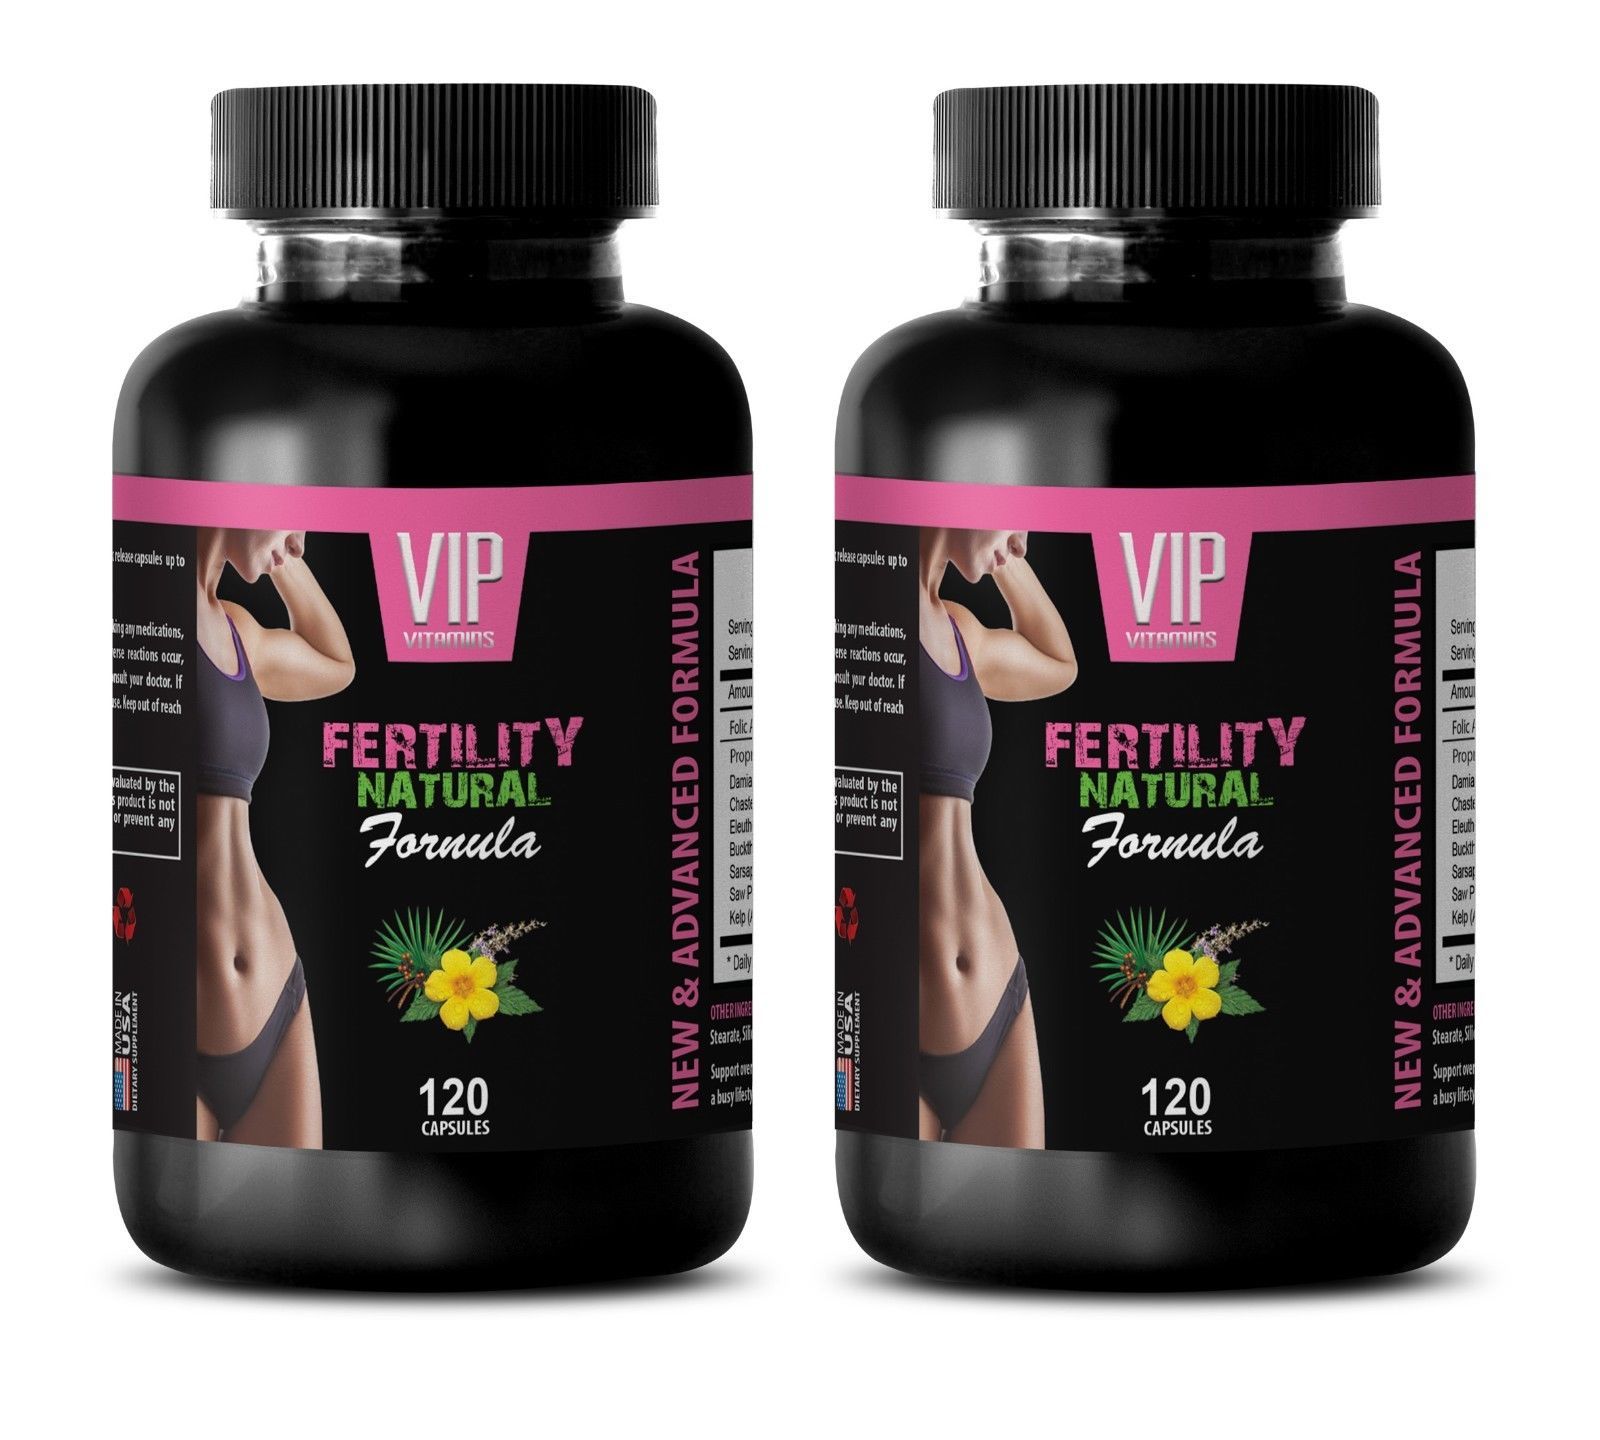 wellness and fitness -2B FERTILITY NATURAL 240 CAPSULES - folate b9 - $33.62